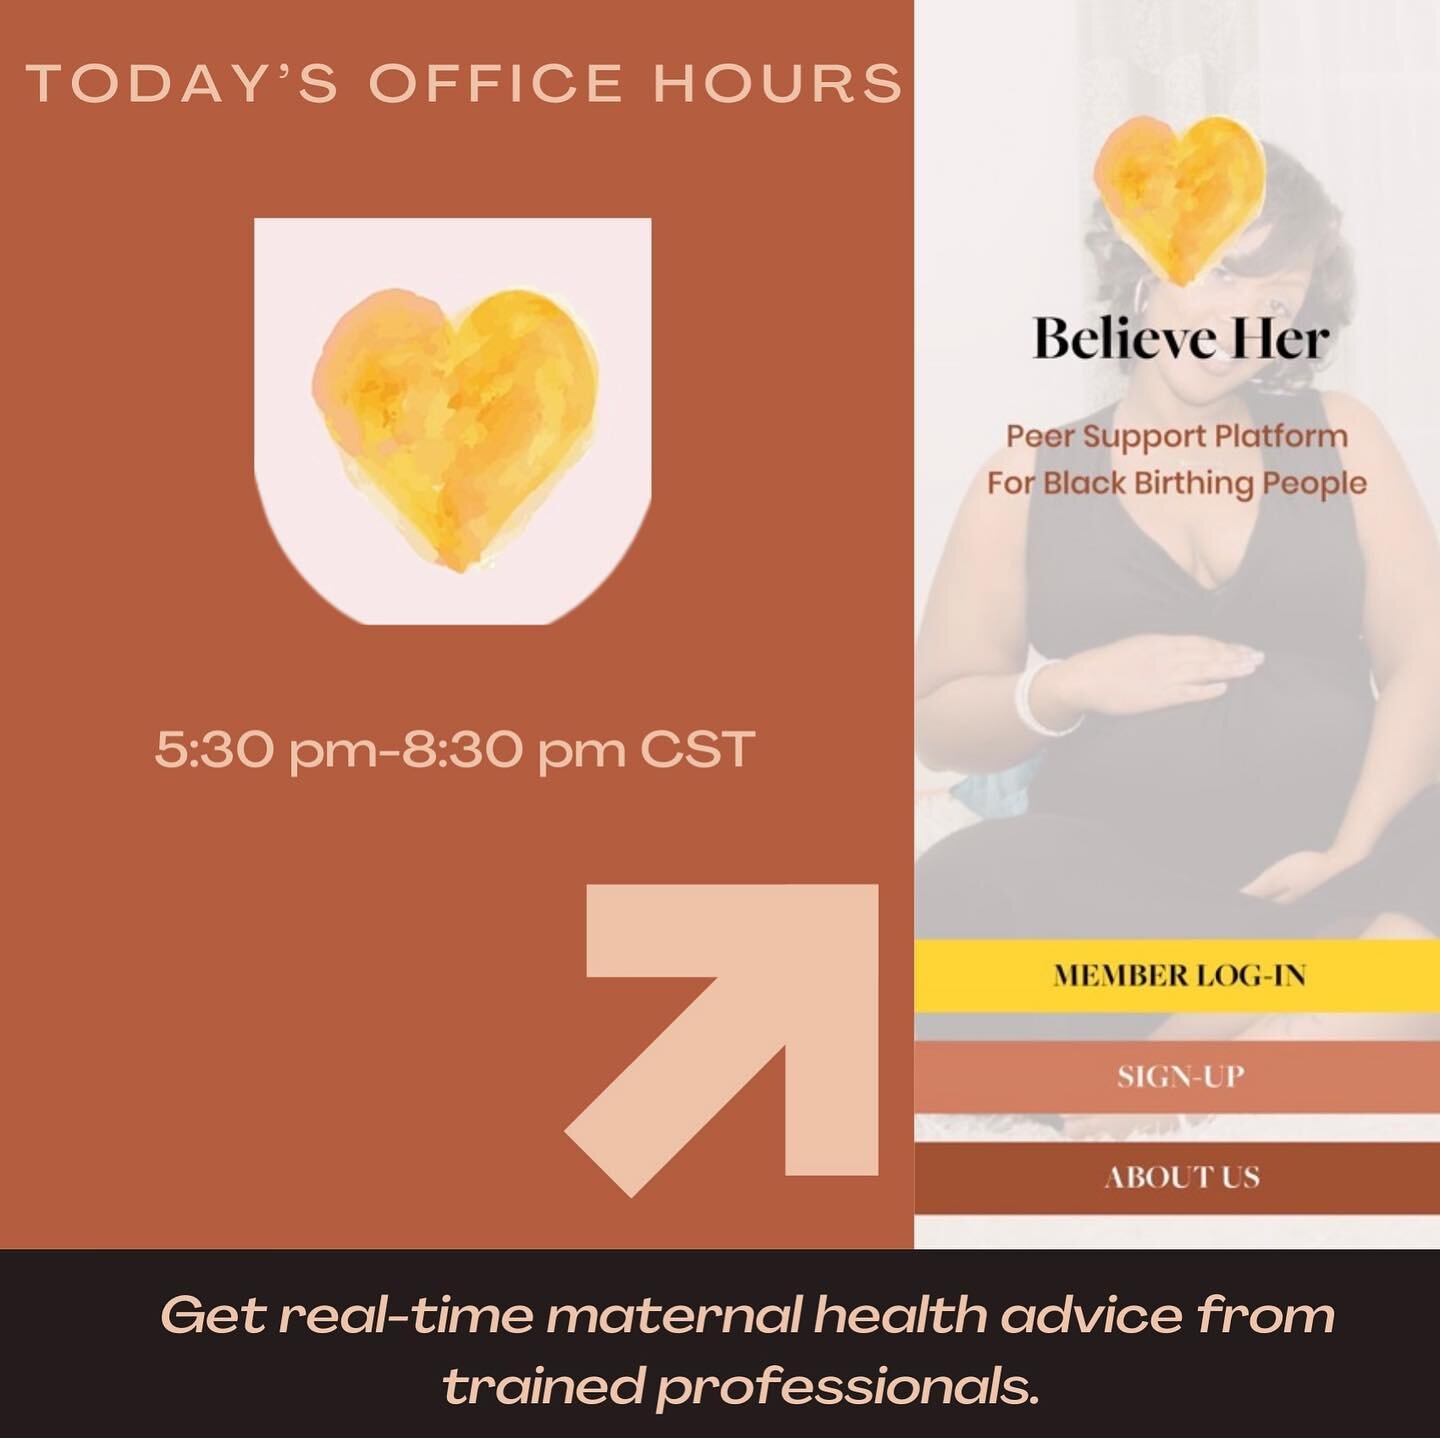 Have questions related to maternal health? Download the #BelieveHerApp today and get the support you need from our trained ambassadors. 

#maternalhealthequity4all
#shalonslegacy
#takethevow
#4shalon
#blackmaternalhealth
#blackmaternalmortality